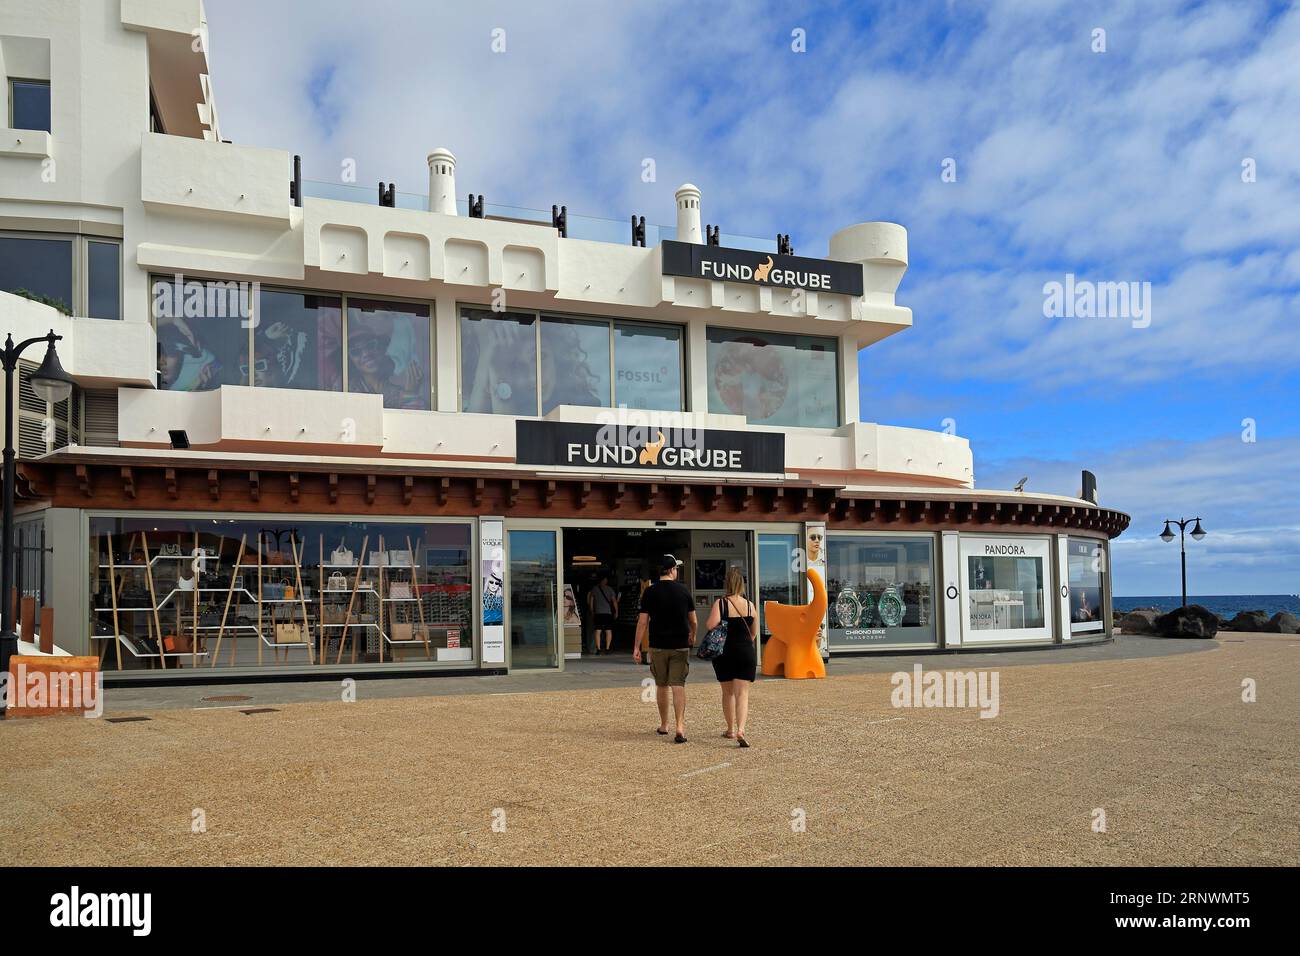 Fund Grube retail outlet, Playa Blanca, Lanzarote, Canary Islands, Spain Stock Photo